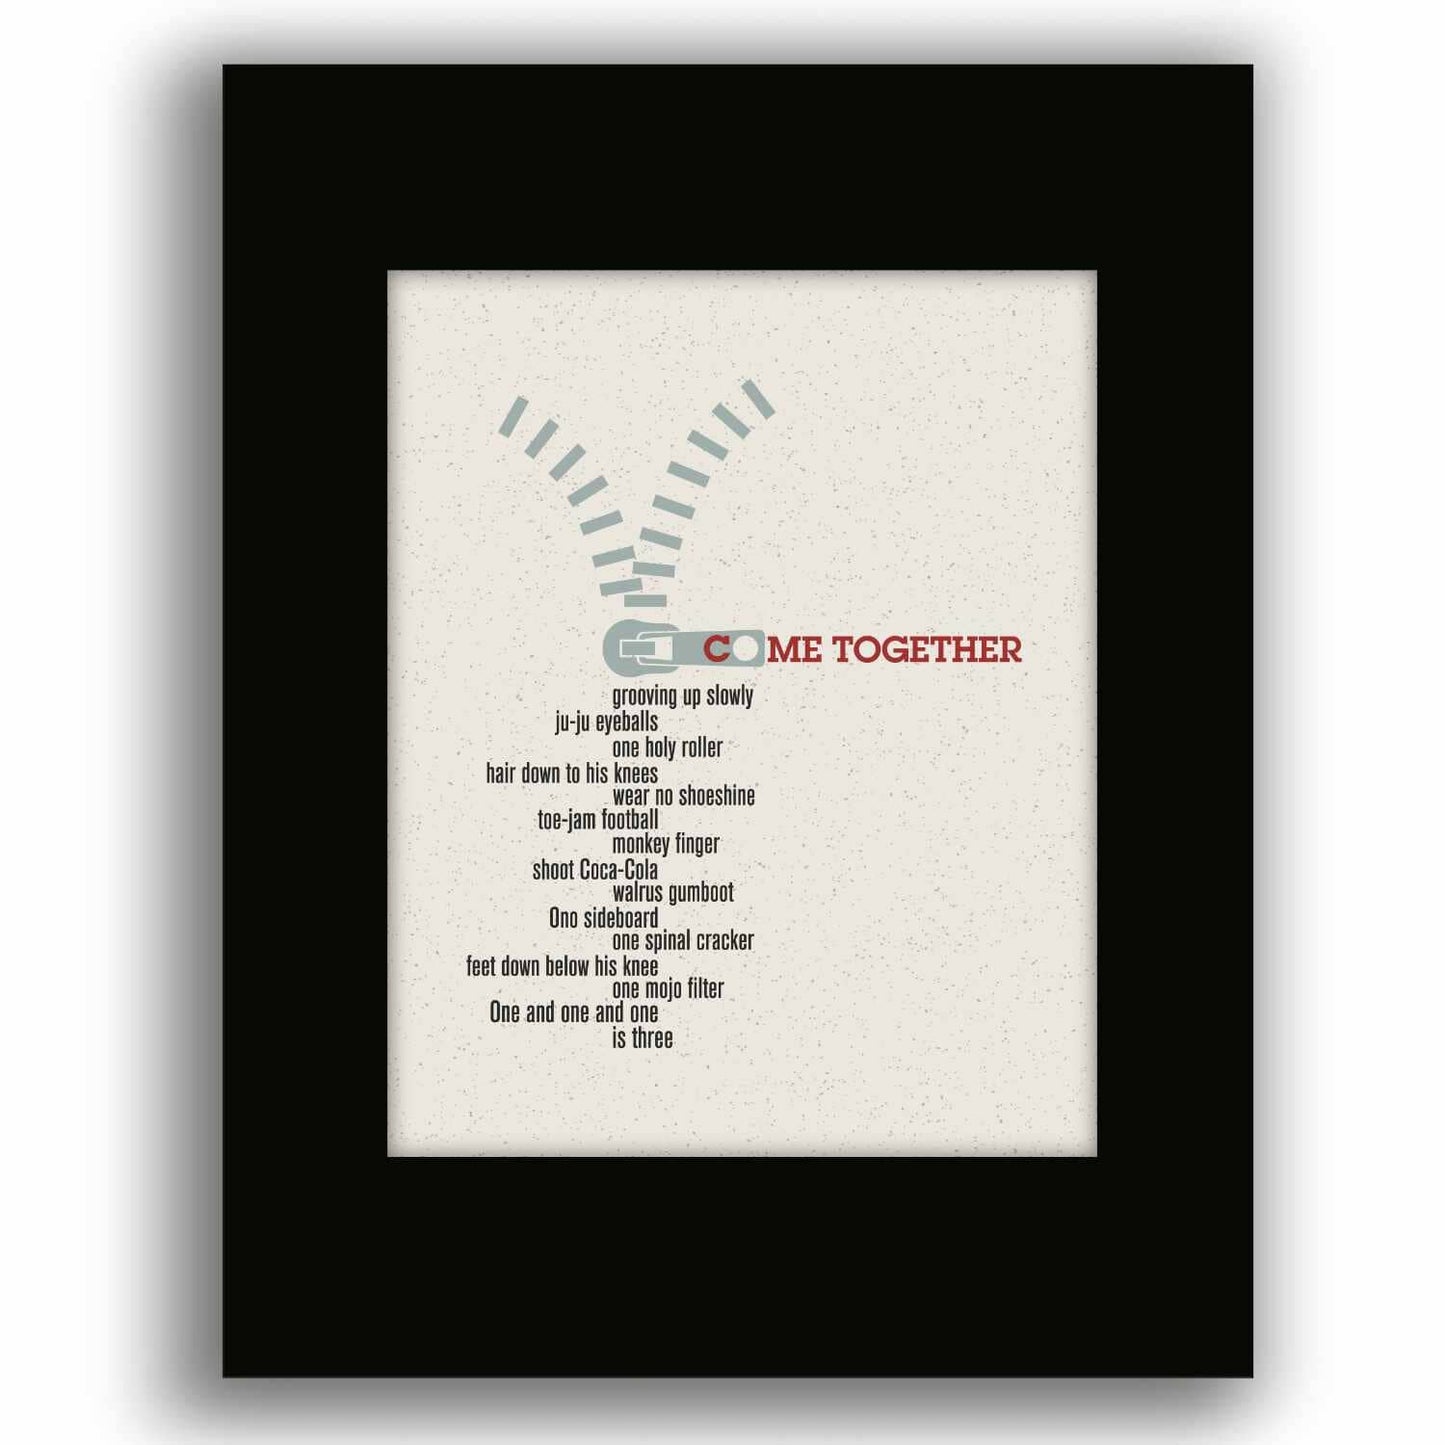 Come Together by the Beatles - Song Lyric Art Wall Print Song Lyrics Art Song Lyrics Art 8x10 Black Matted Print 